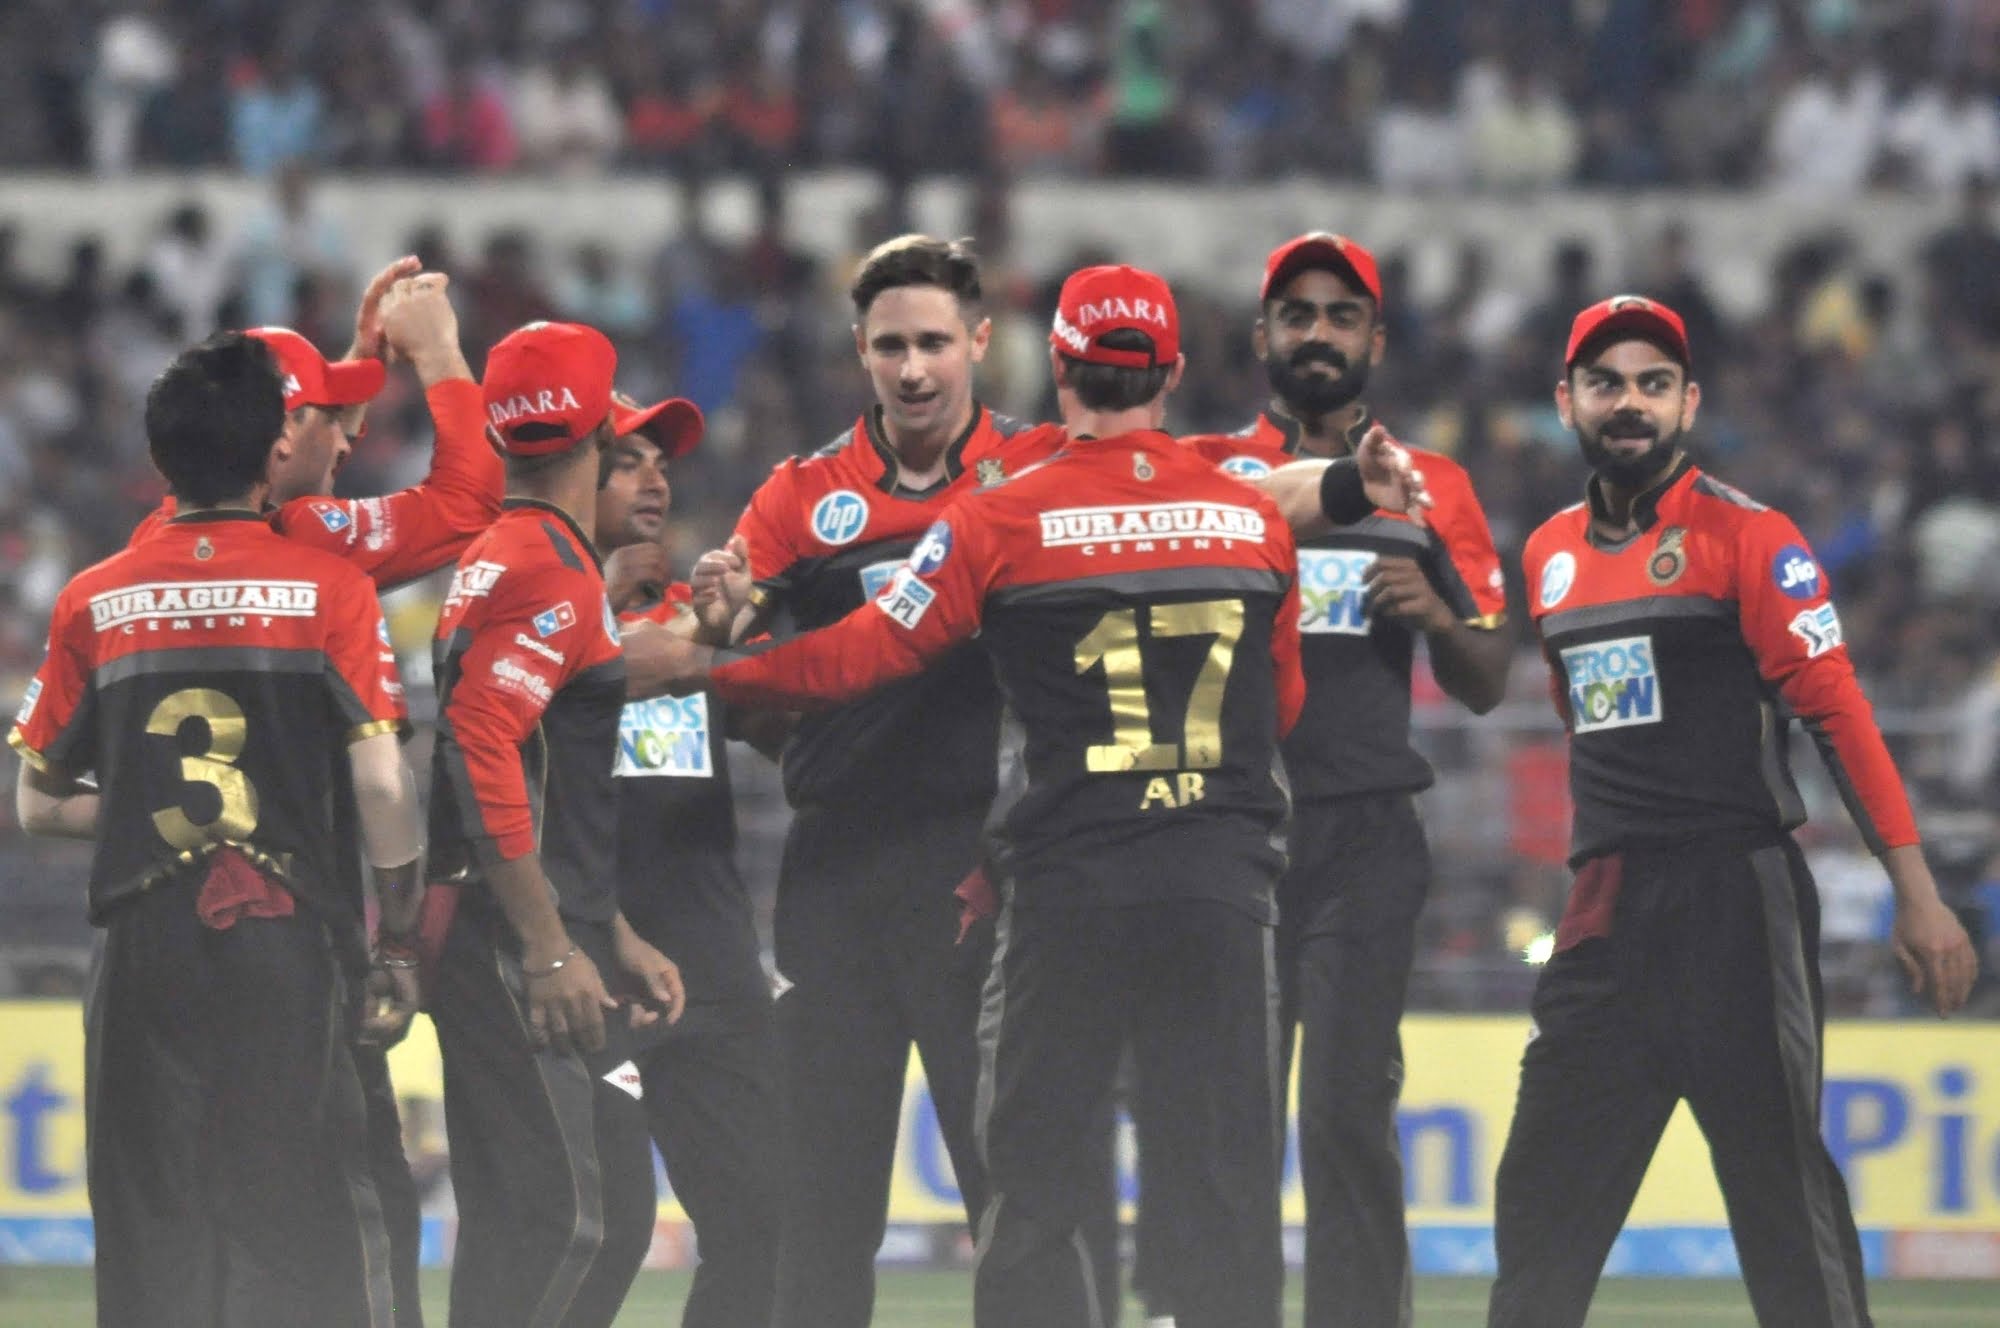 Kolkata: Royal Challengers Bangalore players celebrate fall of a wicket during an IPL 2018 match between Kolkata Knight Riders and Royal Challengers Bangalore at the Eden Gardens in Kolkata 